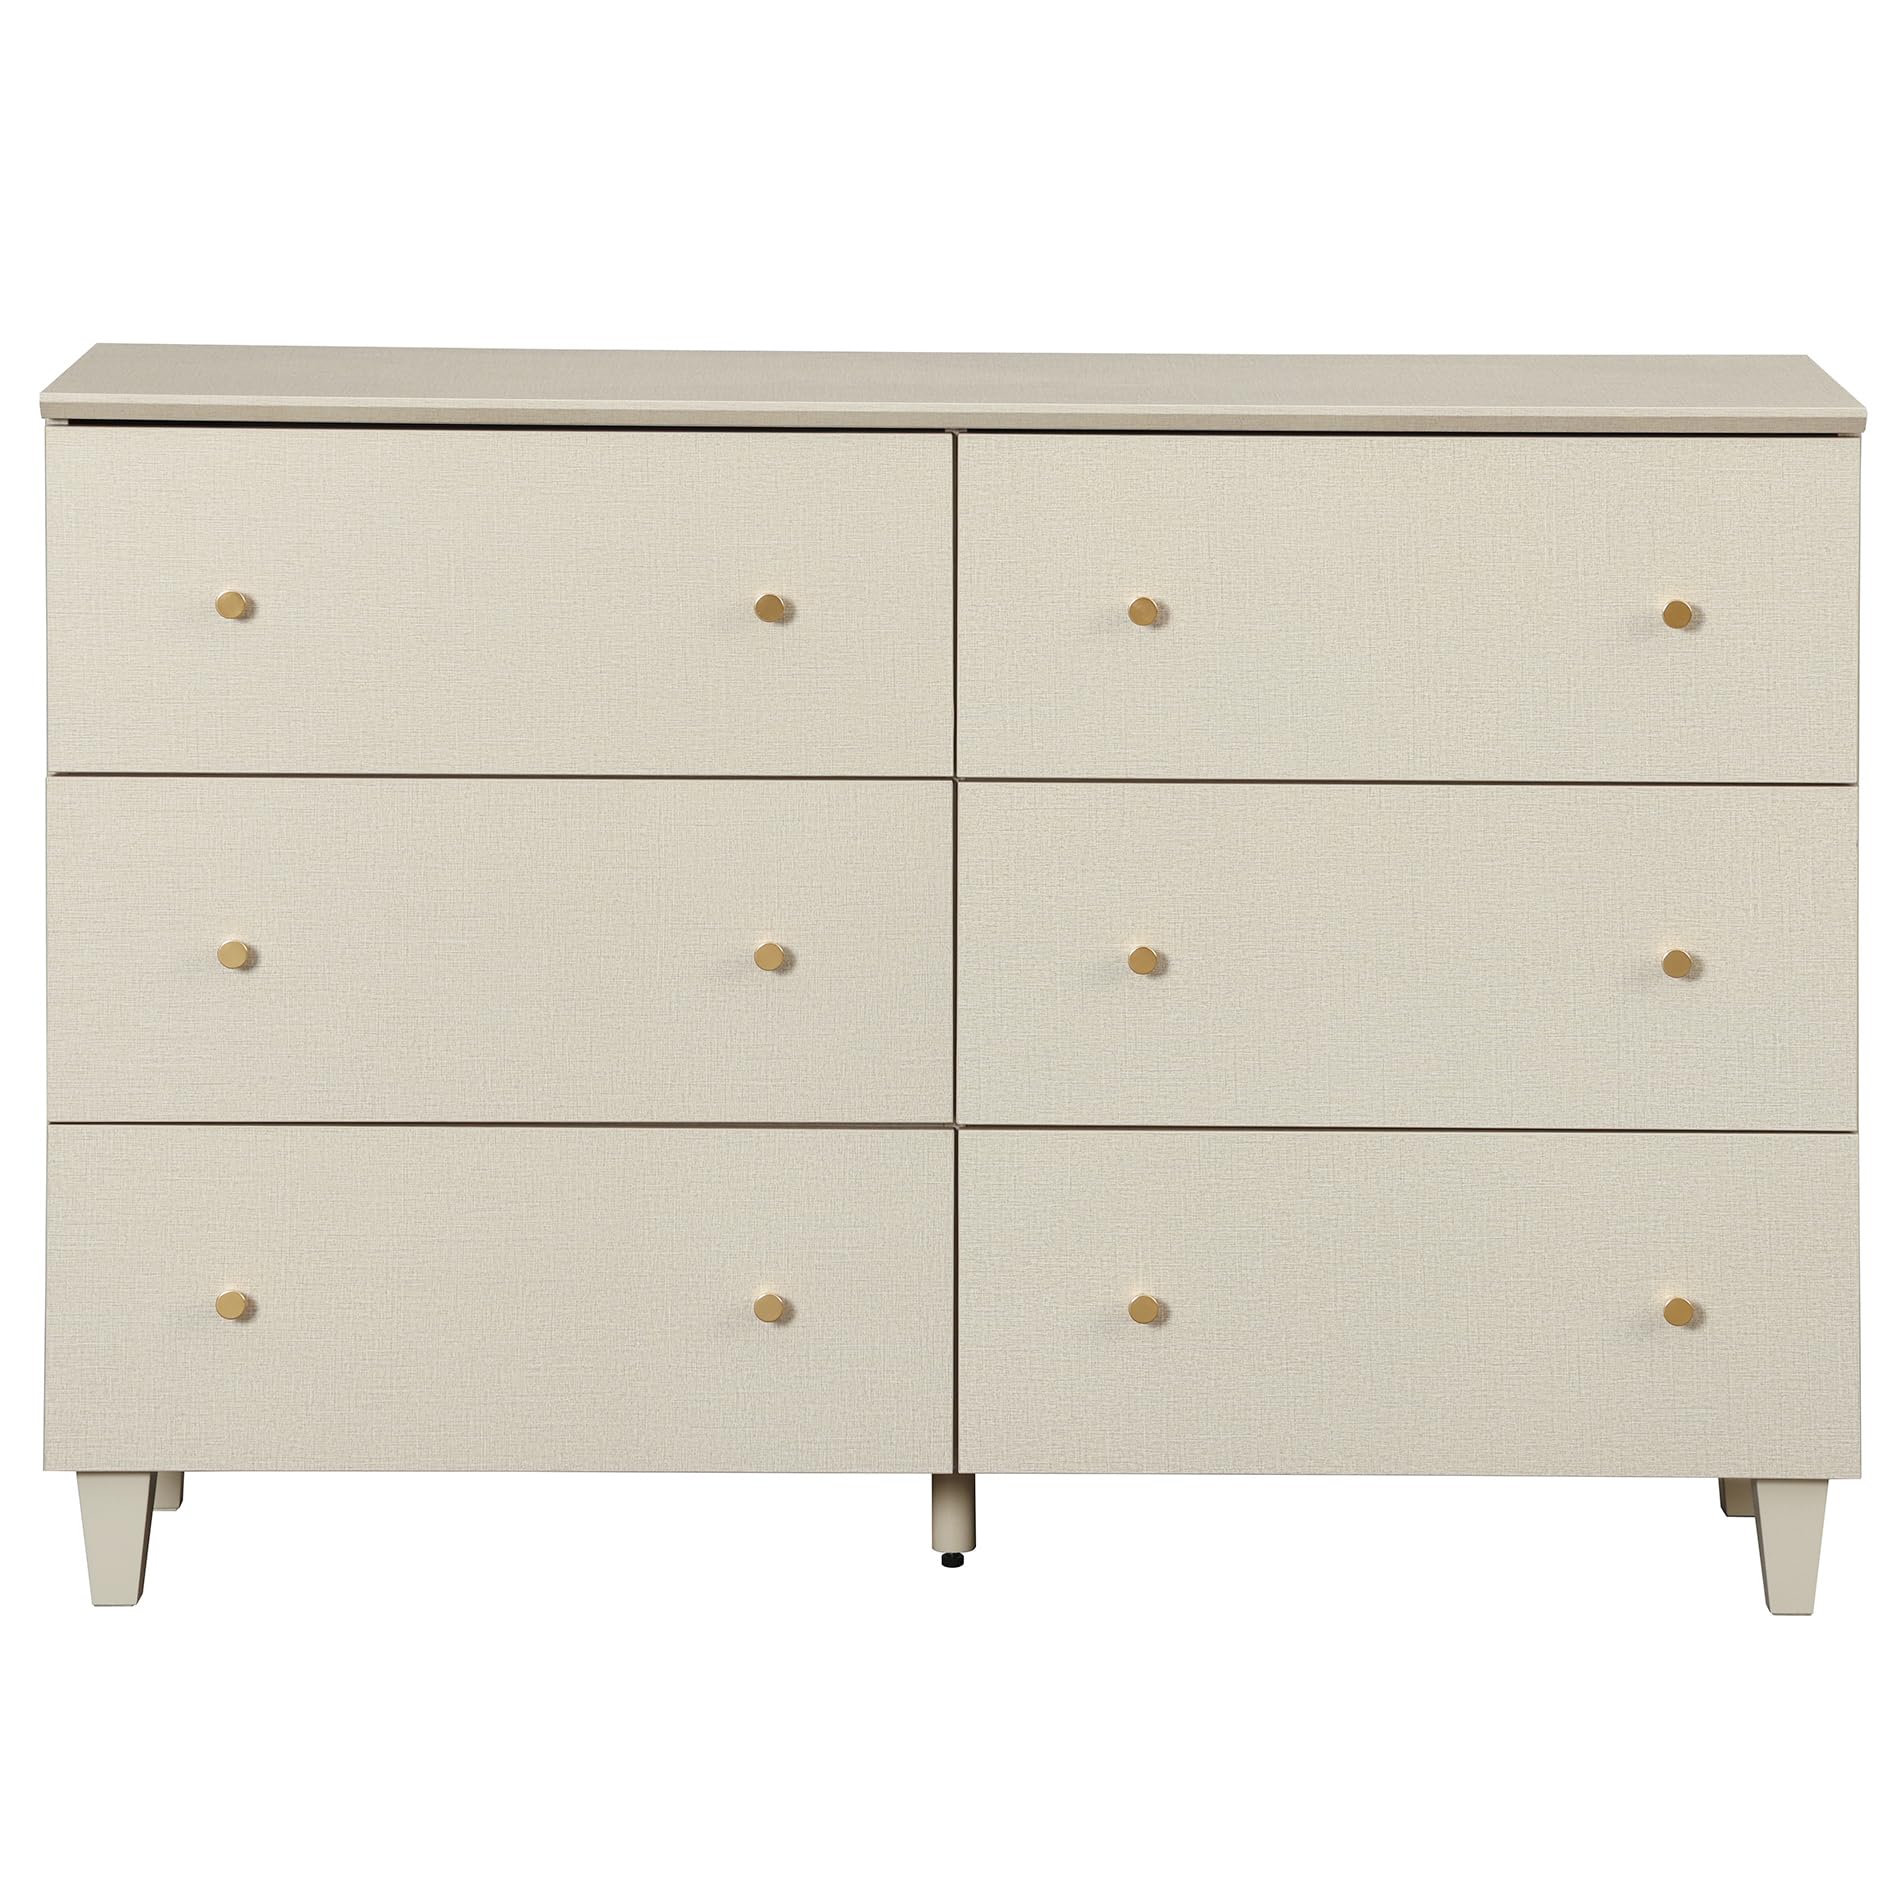 WAMPAT 6 Drawers Dresser for Bedroom, 47.2" Wide Double Dressers with Chest of Drawers, Modern Beige Wood Closet Storage Organizer with Gold Knobs & Solid Legs for Kids Baby Room, Nursery